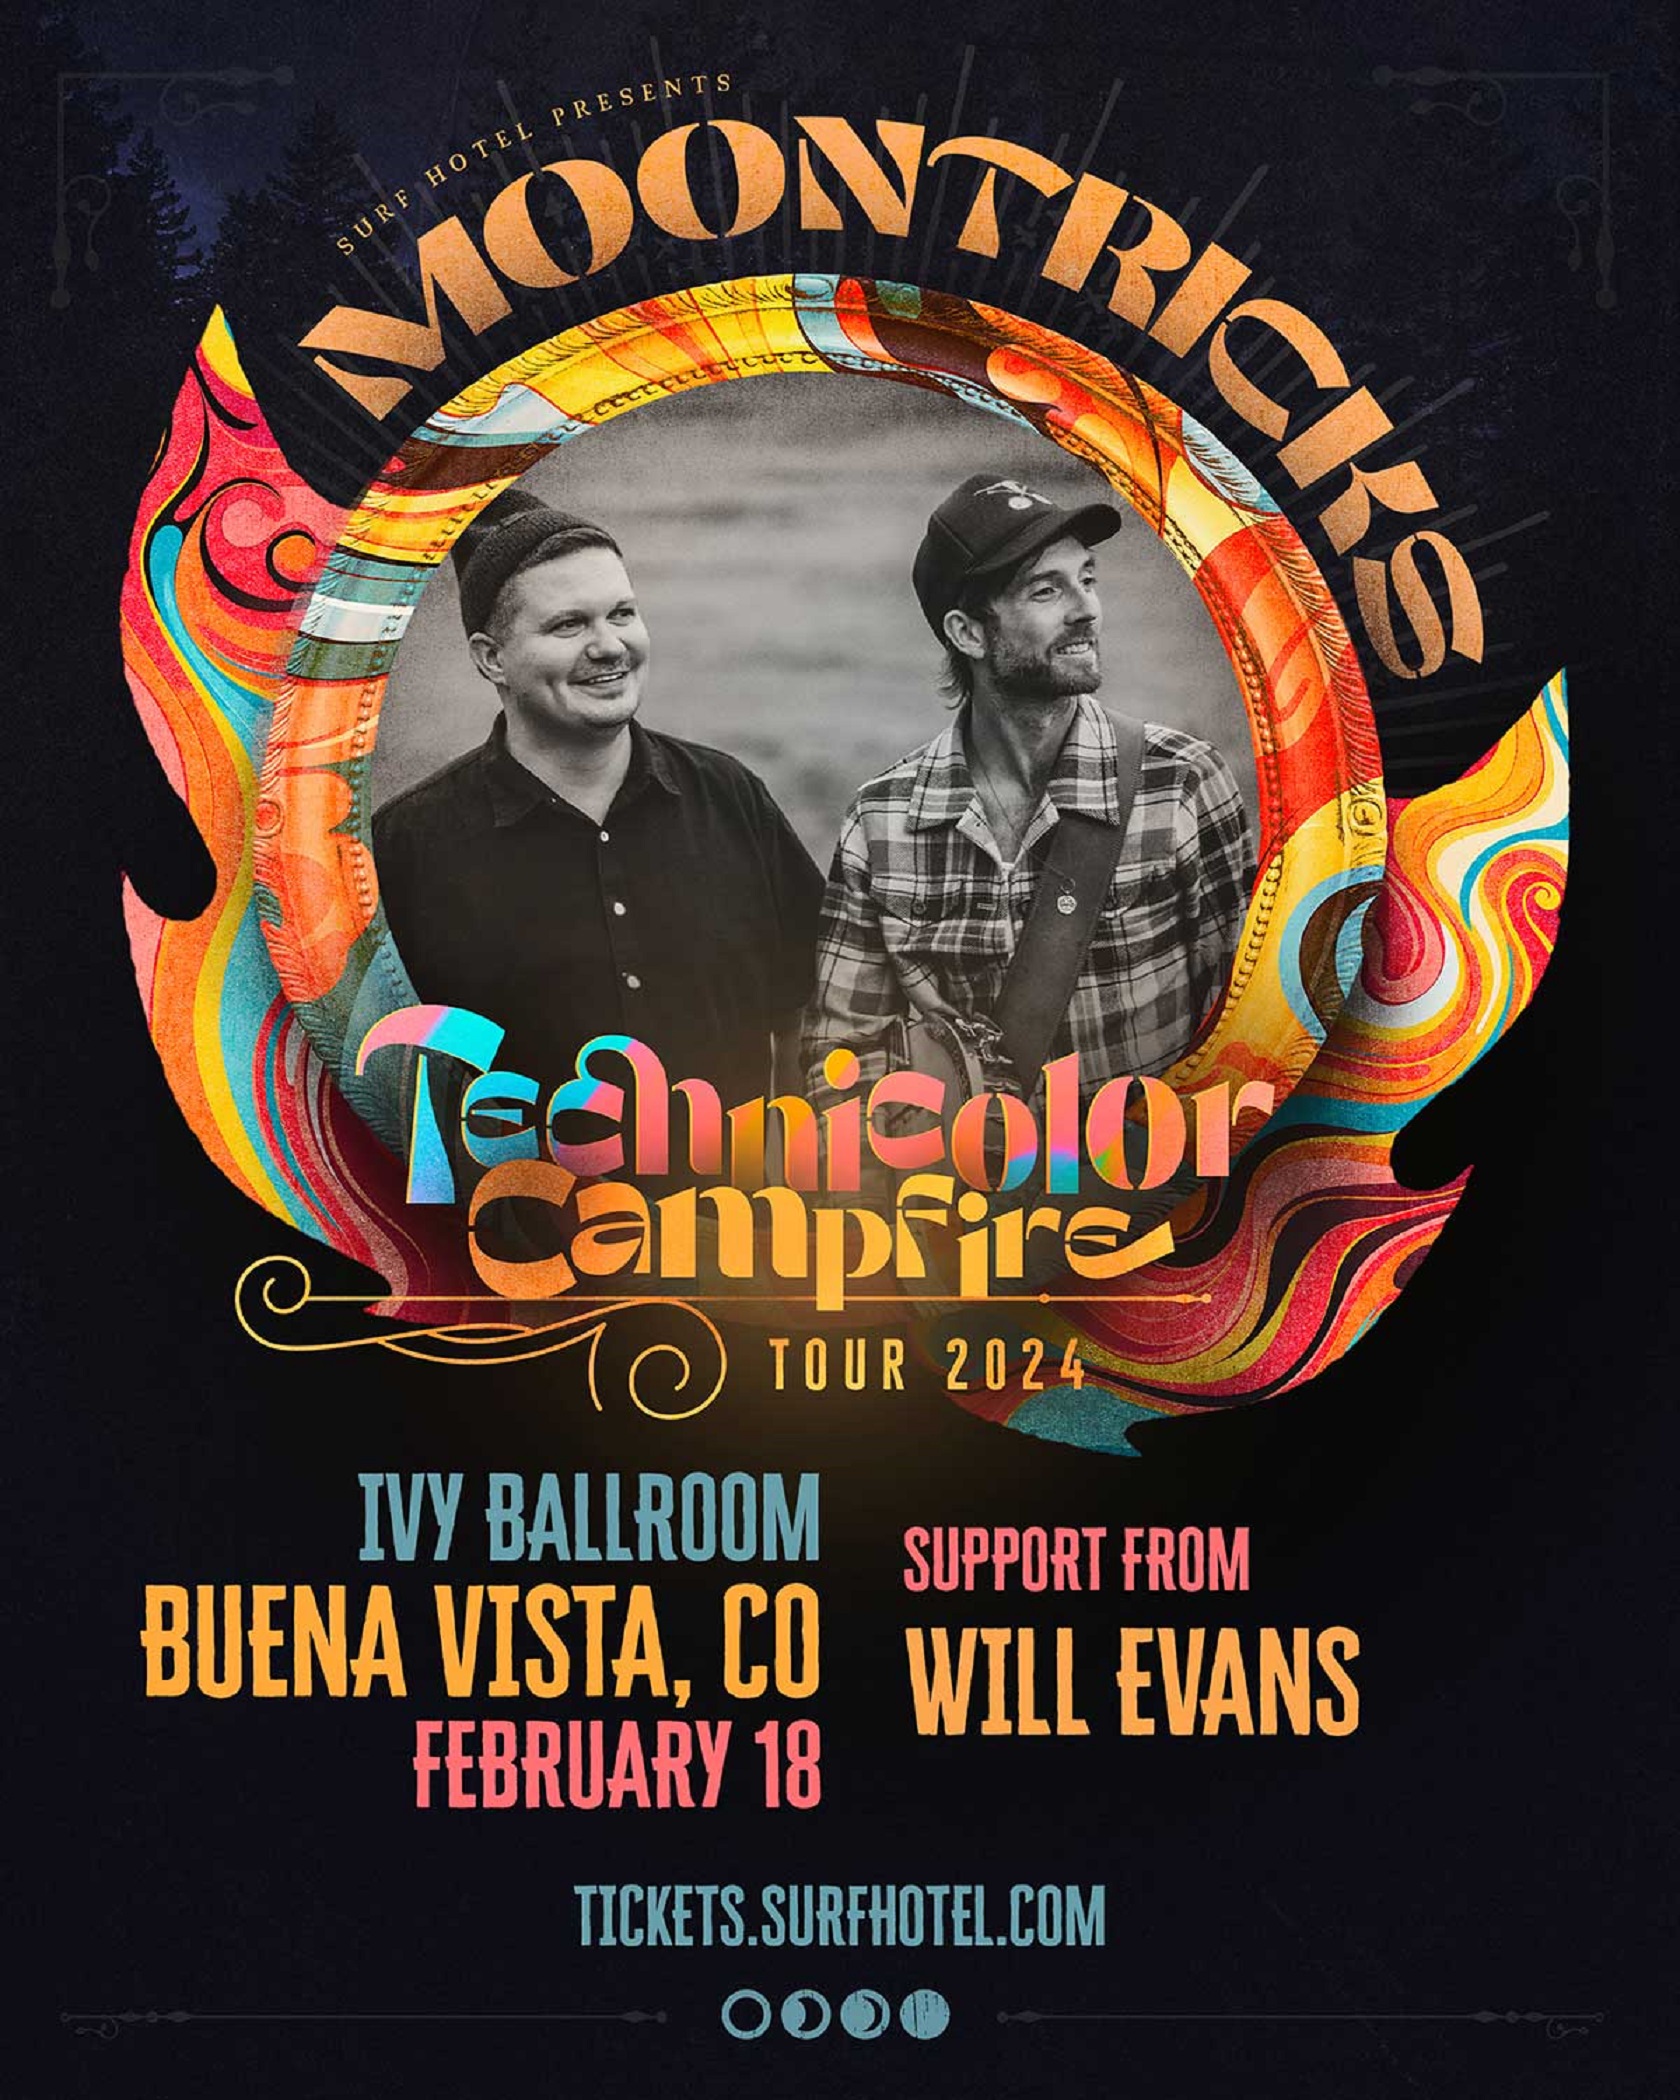 Nationally Renowned Electro-Folk Duo Moontricks and Special Guest Will Evans Will Perform in the Ivy Ballroom in Buena Vista, Colorado on Sunday, February 18th